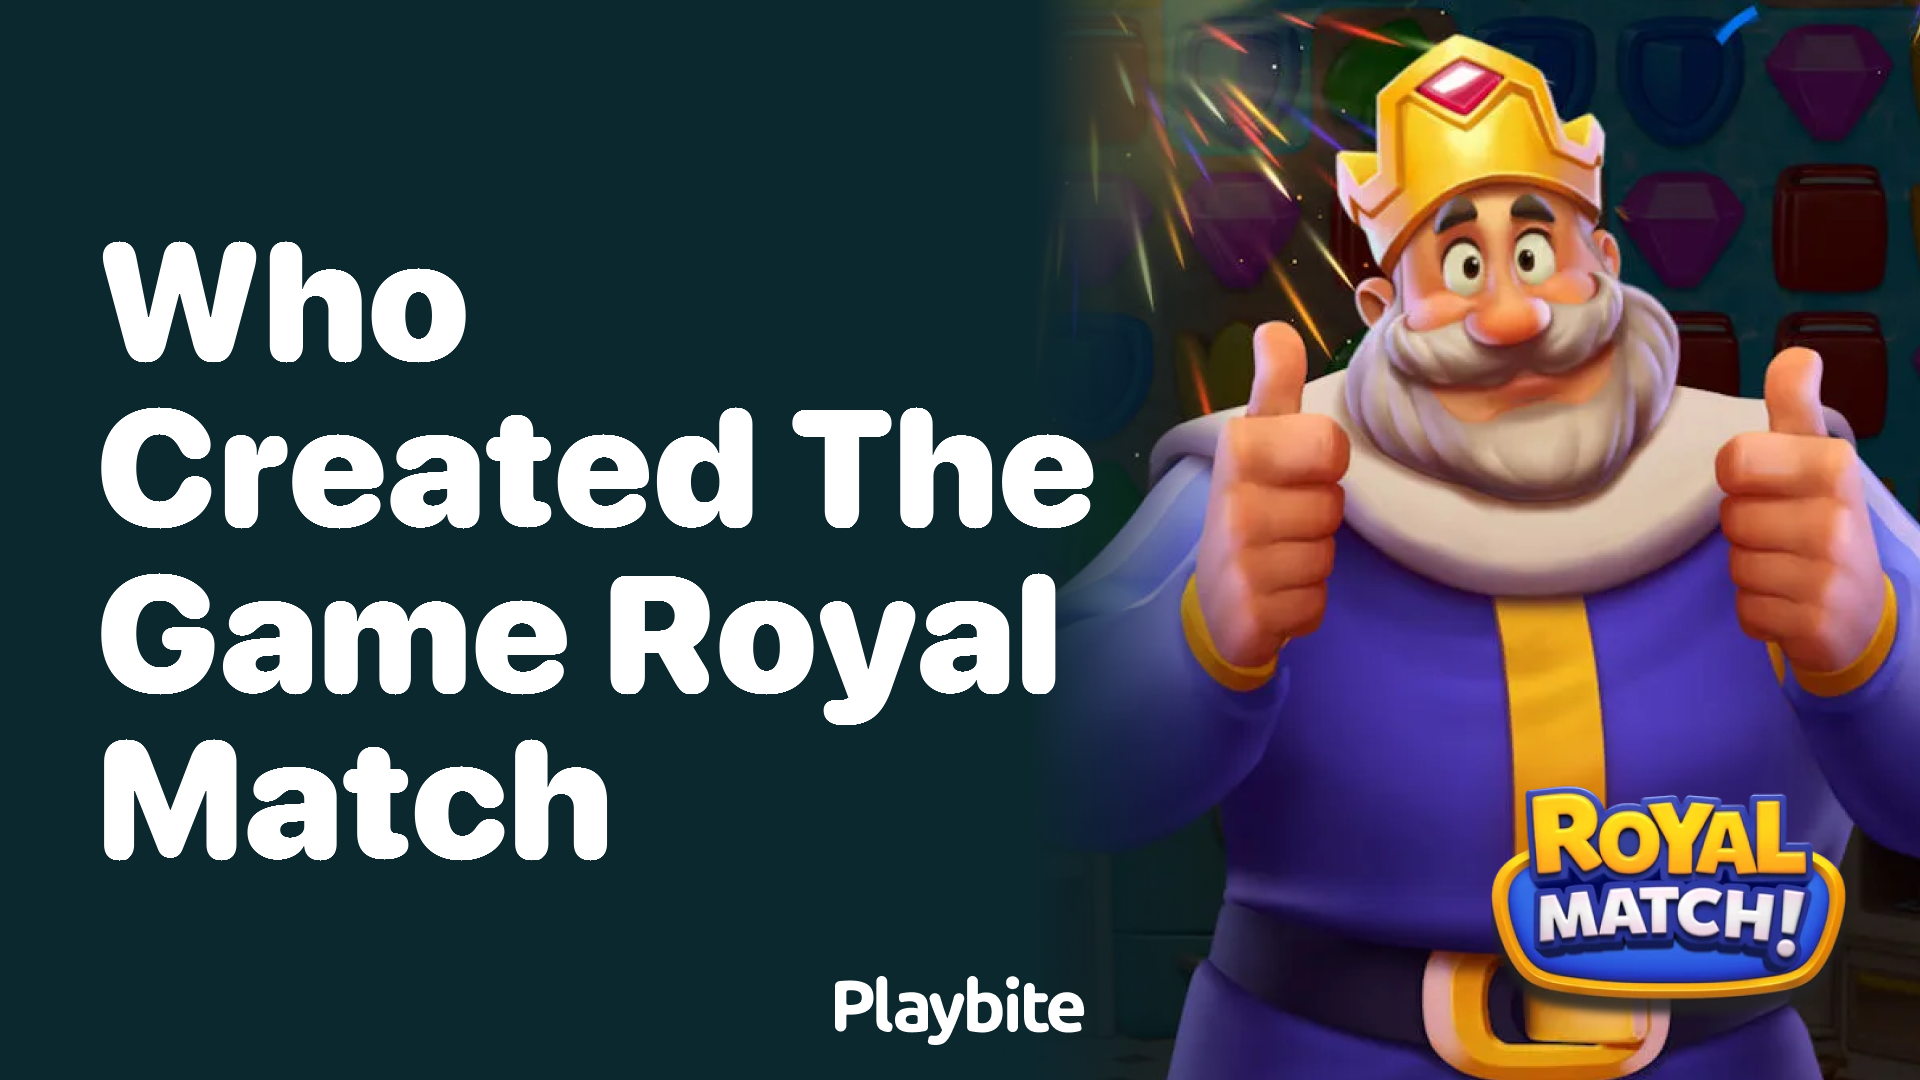 Who Created the Game Royal Match?